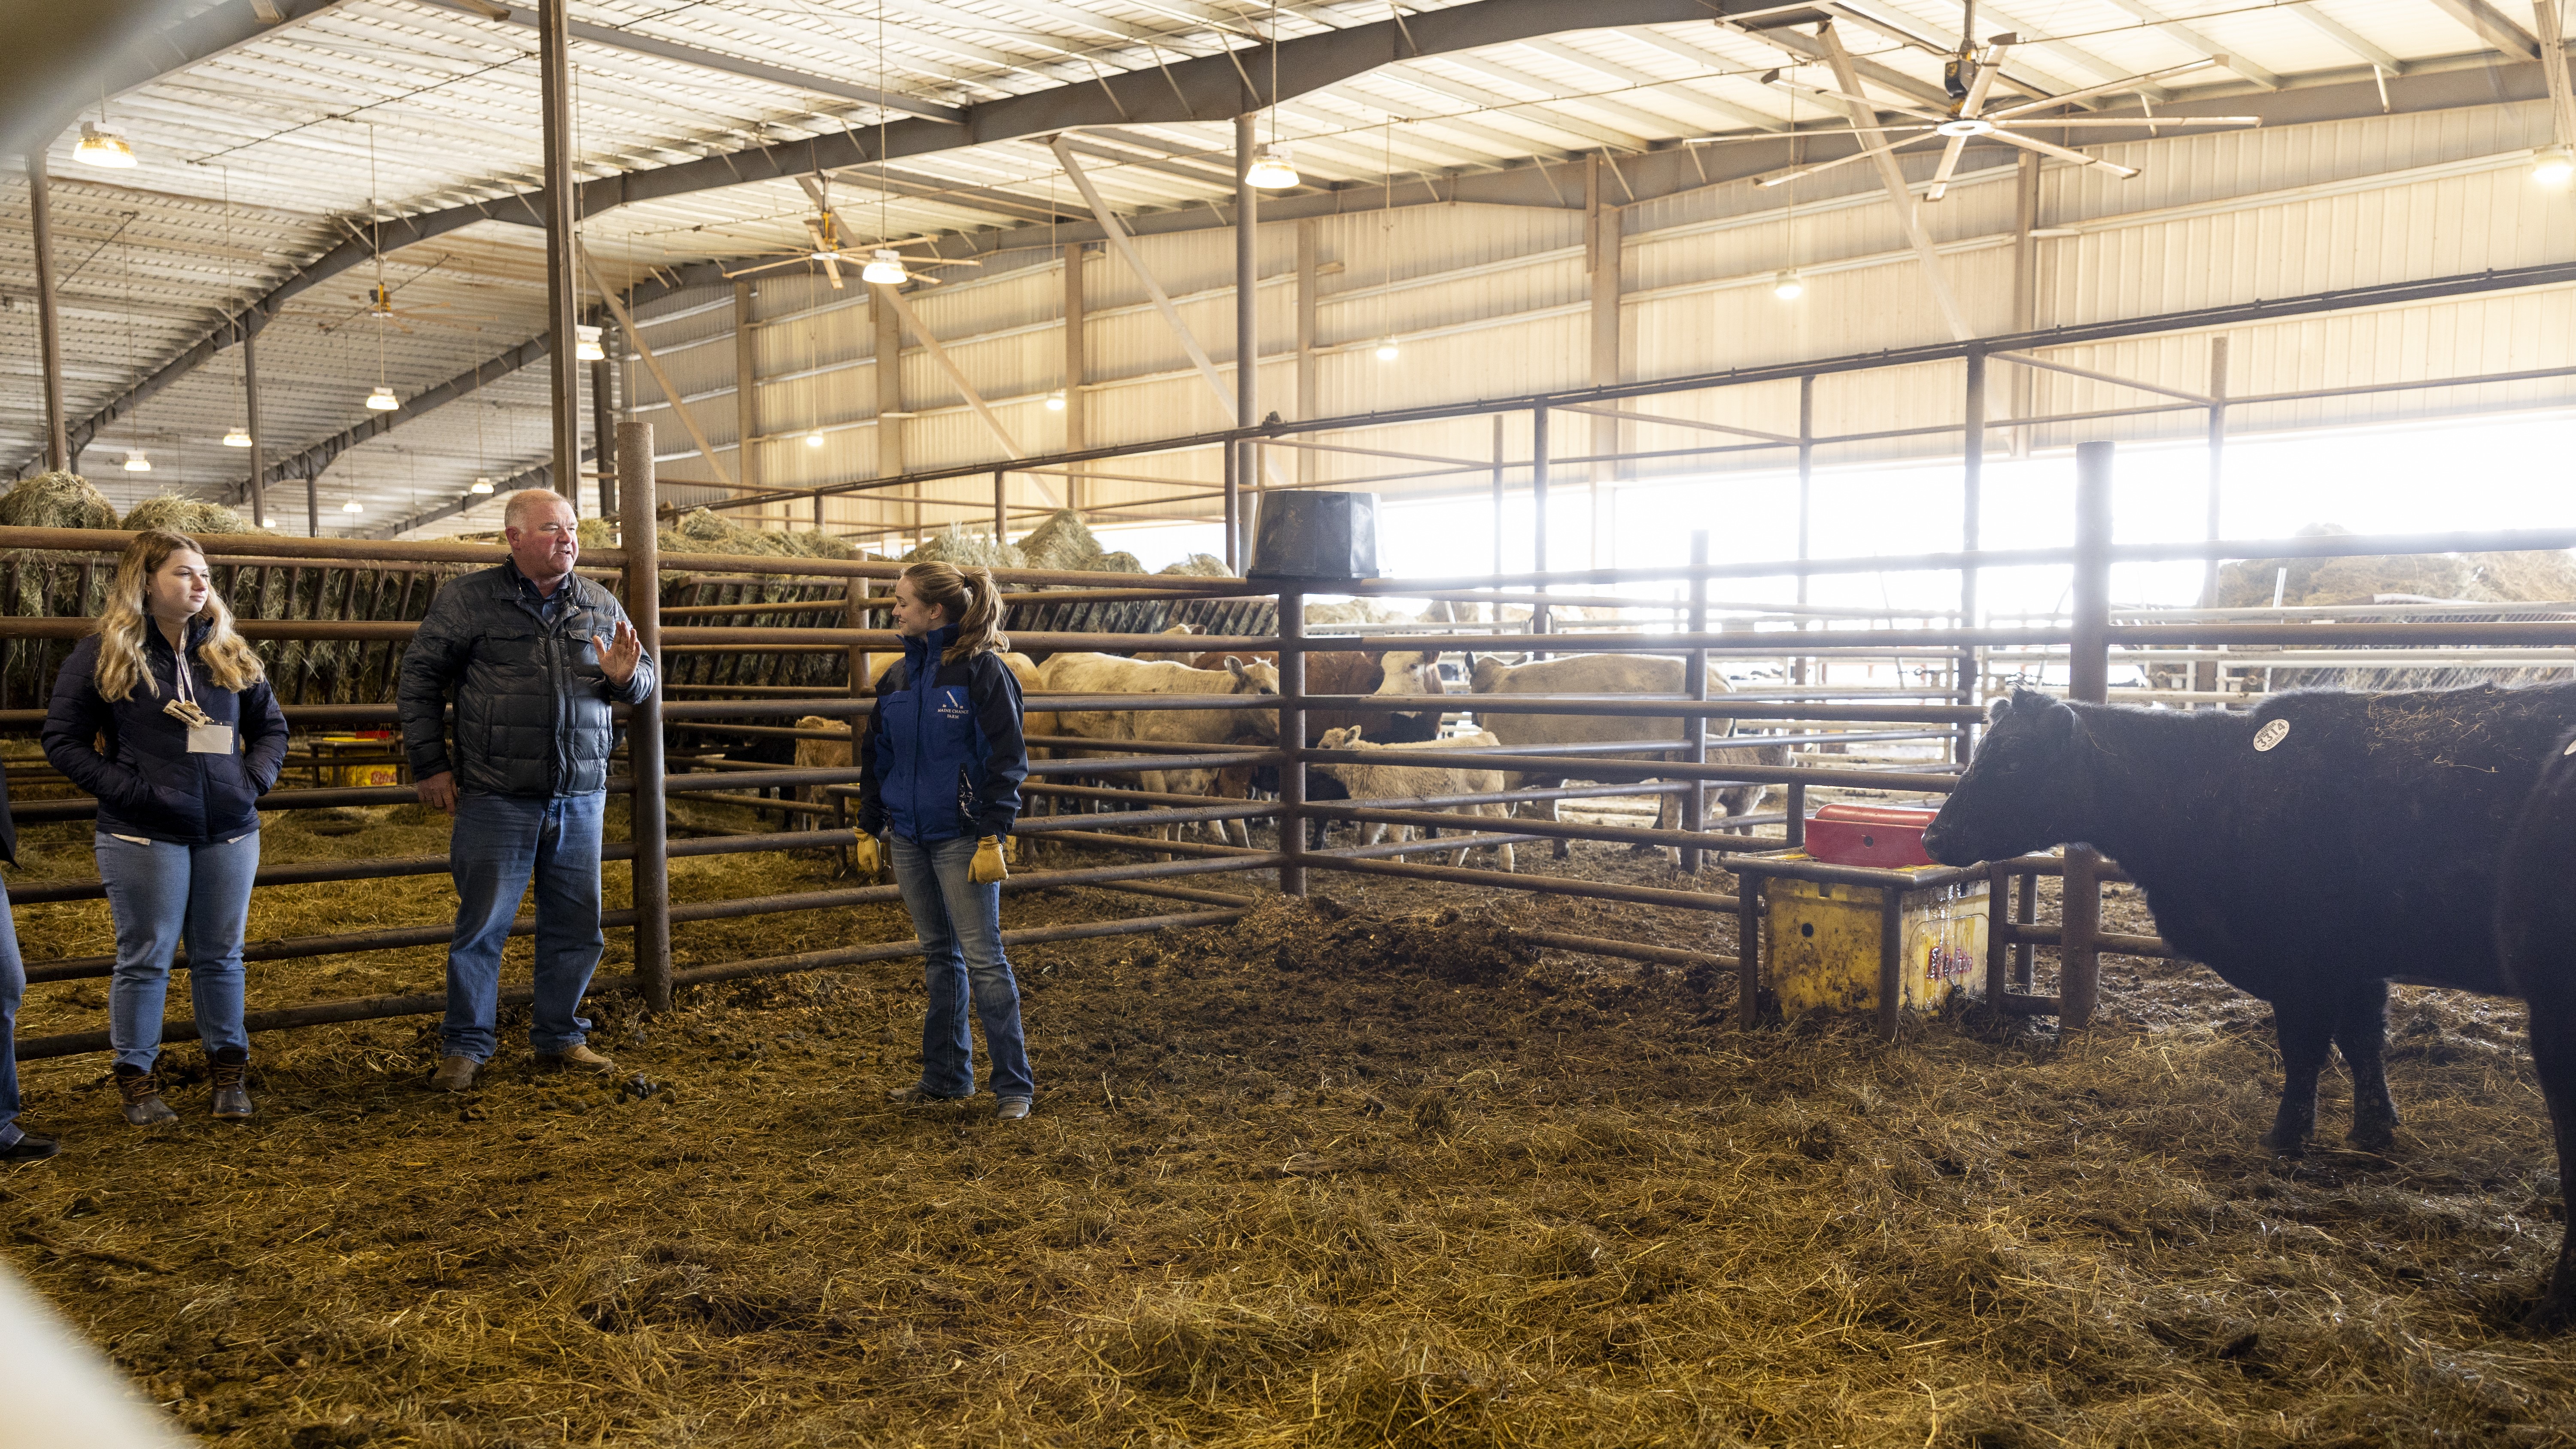 Students, while supervised, had an opportunity to participate in hands-on learning while on the Bluegrass Stockyards industry tour. Photo by Sabrina Hounshell.